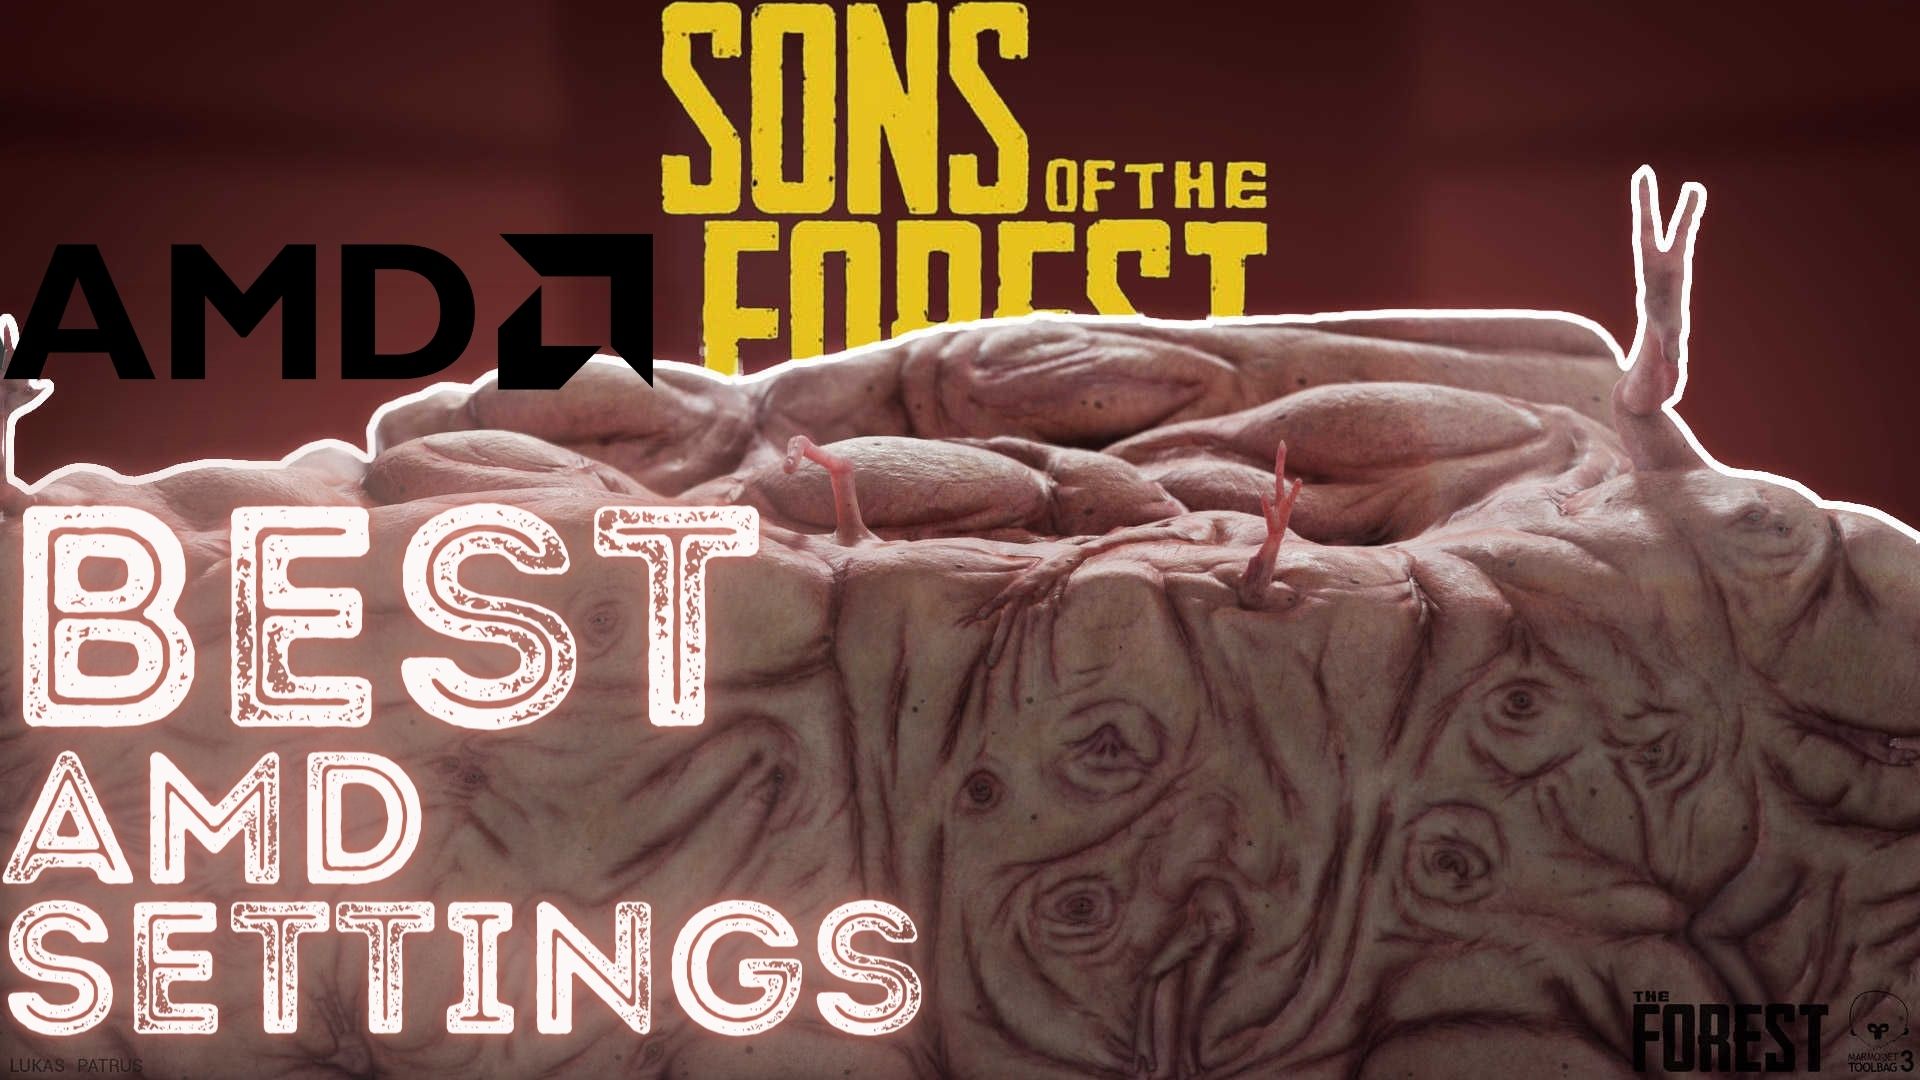 Best AMD Settings for Sons of Forest